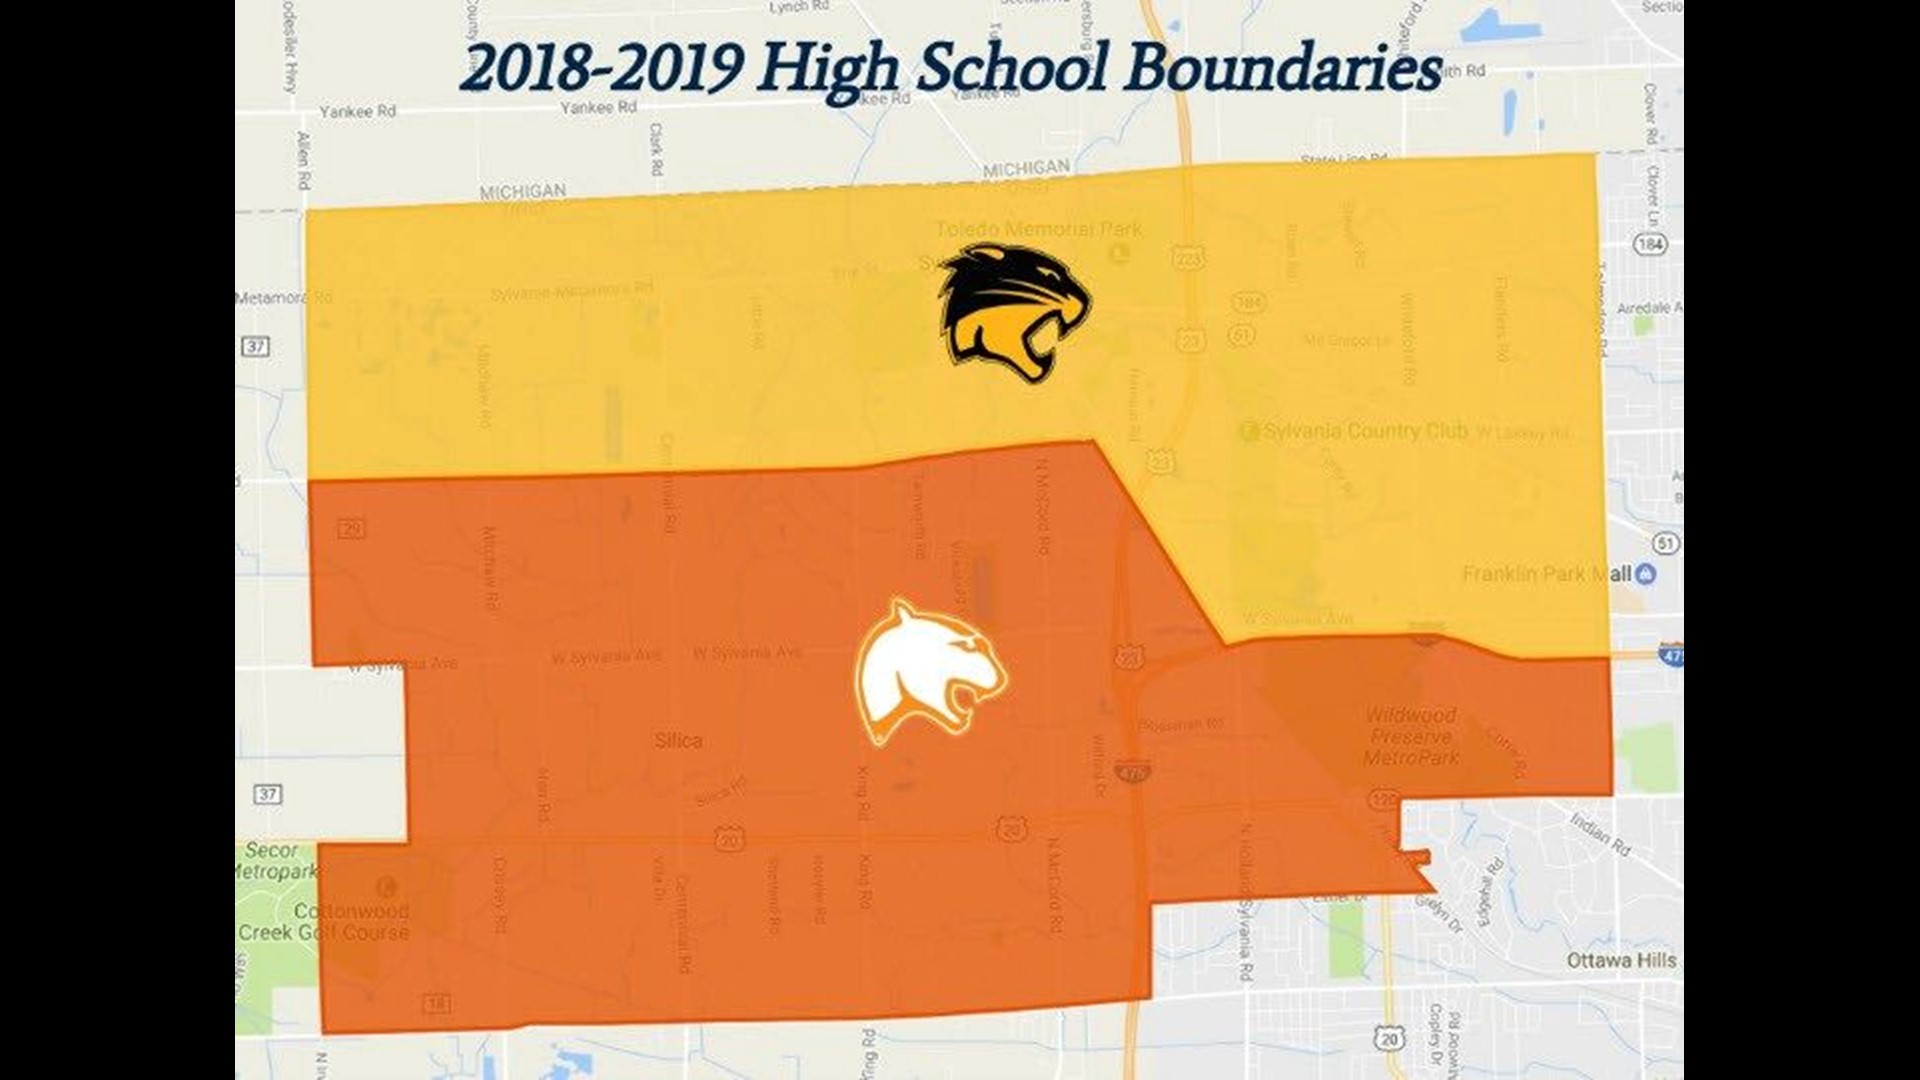 Boundaries released for Sylvania School's official redistricting